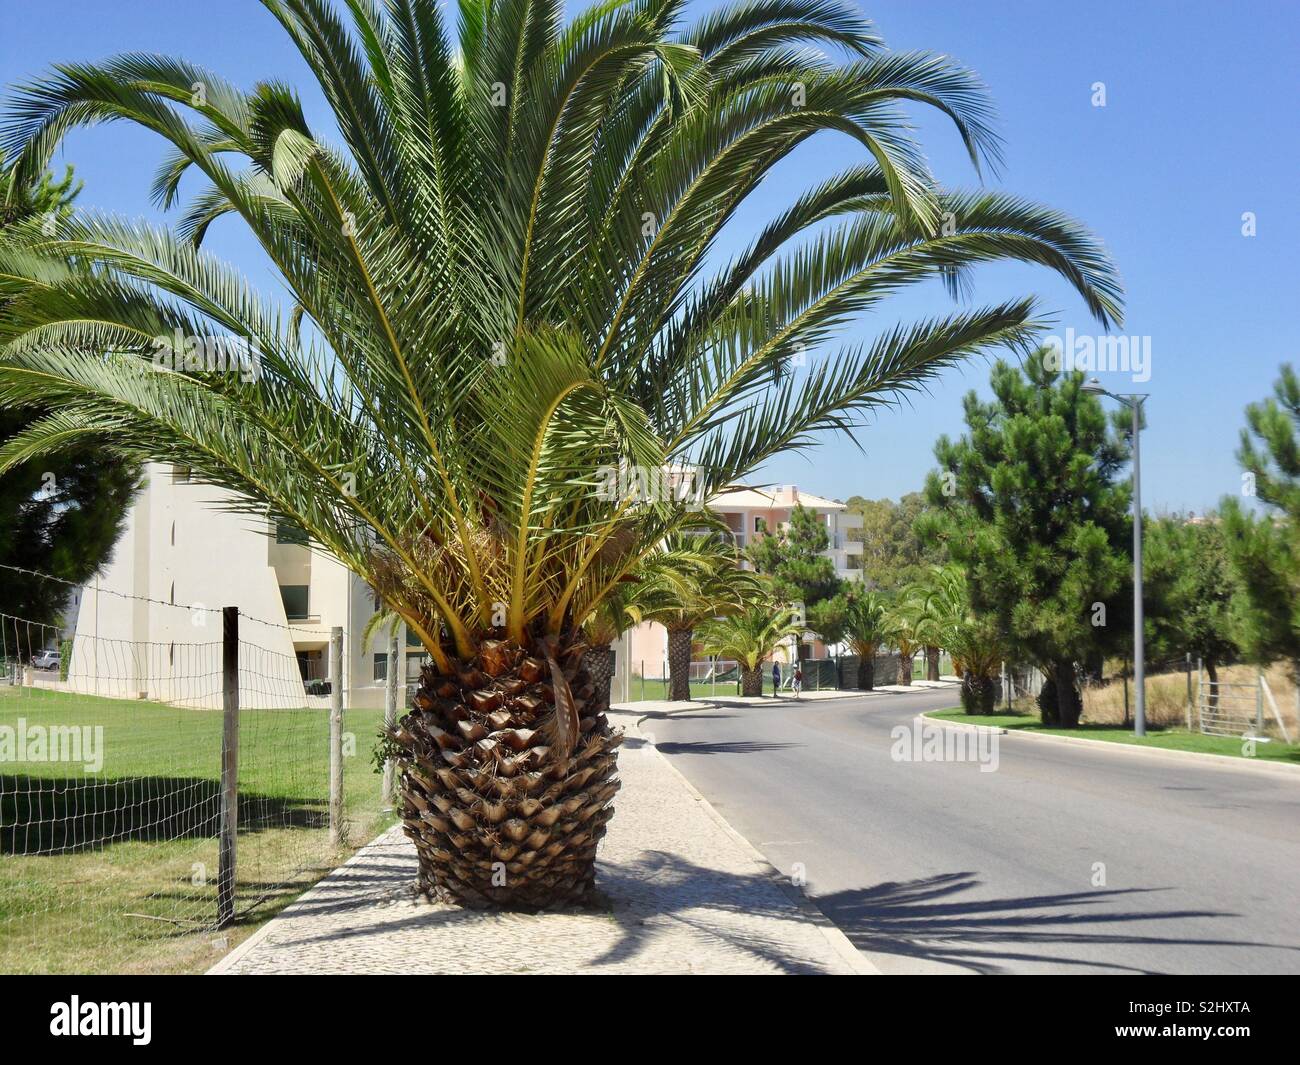 Pineapple palm tree in Albufeira, Portugal Stock Photo